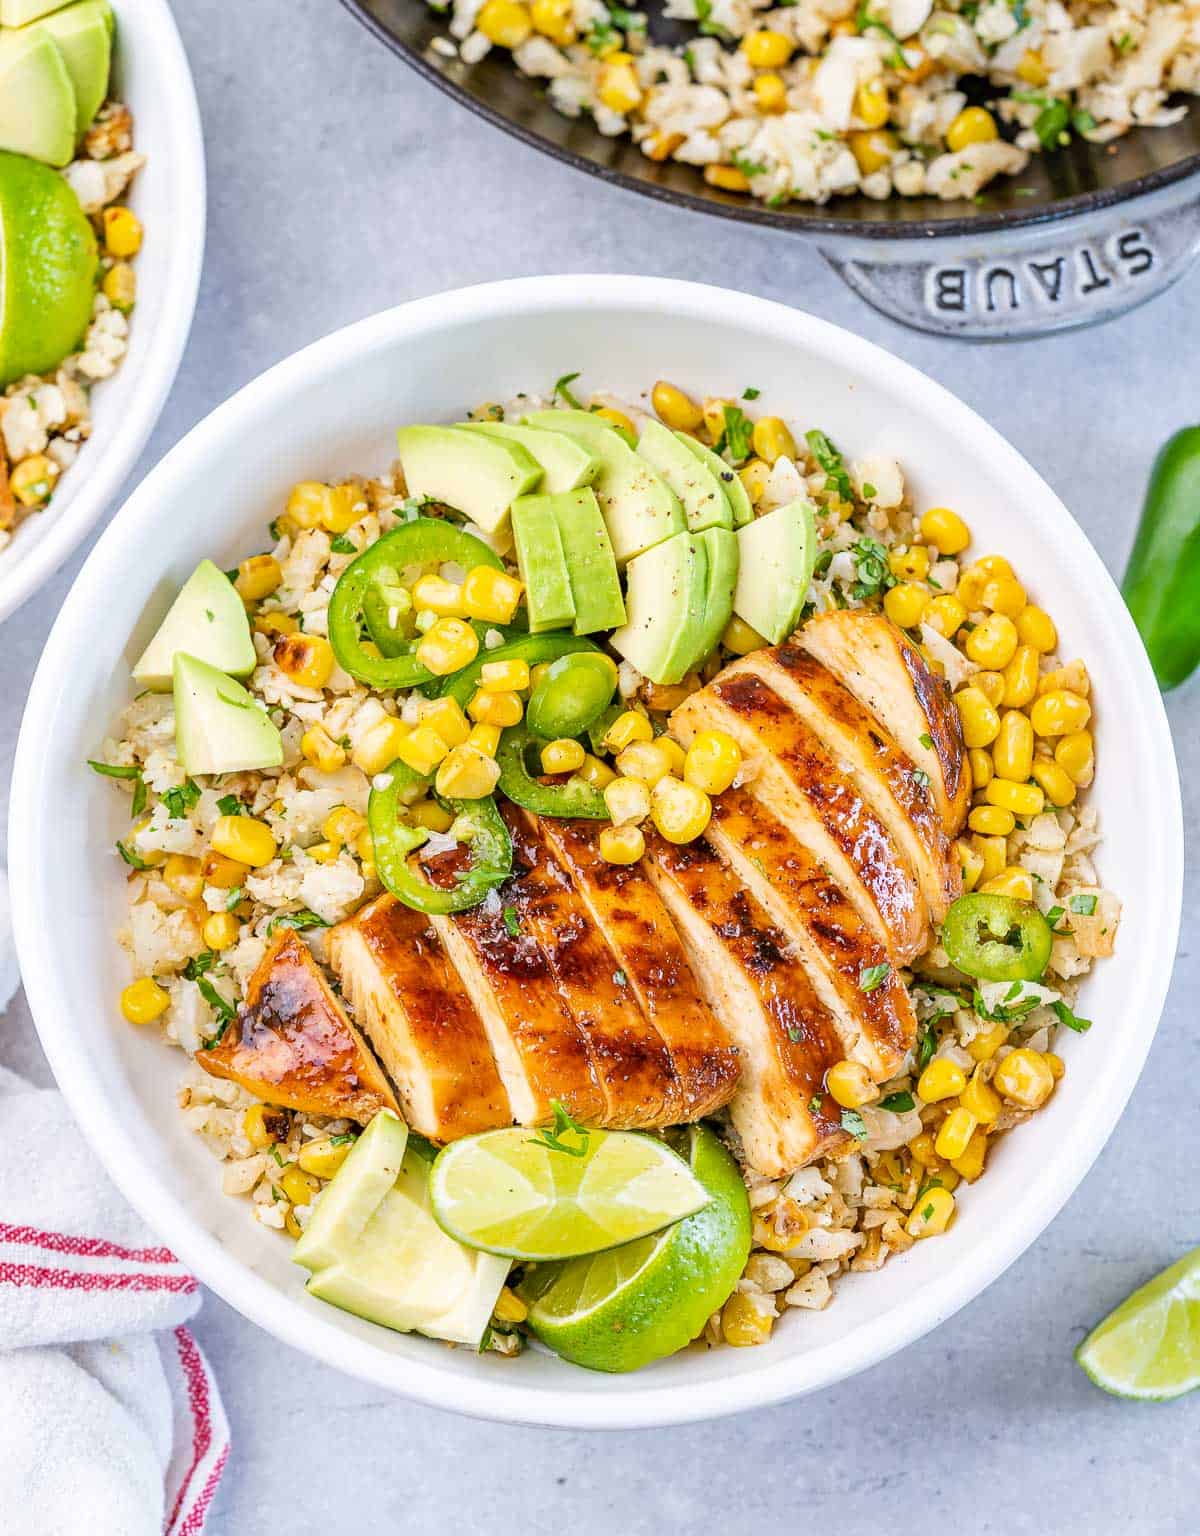 Chipotle chicken rice bowl served with sliced avocado and lime wedges.